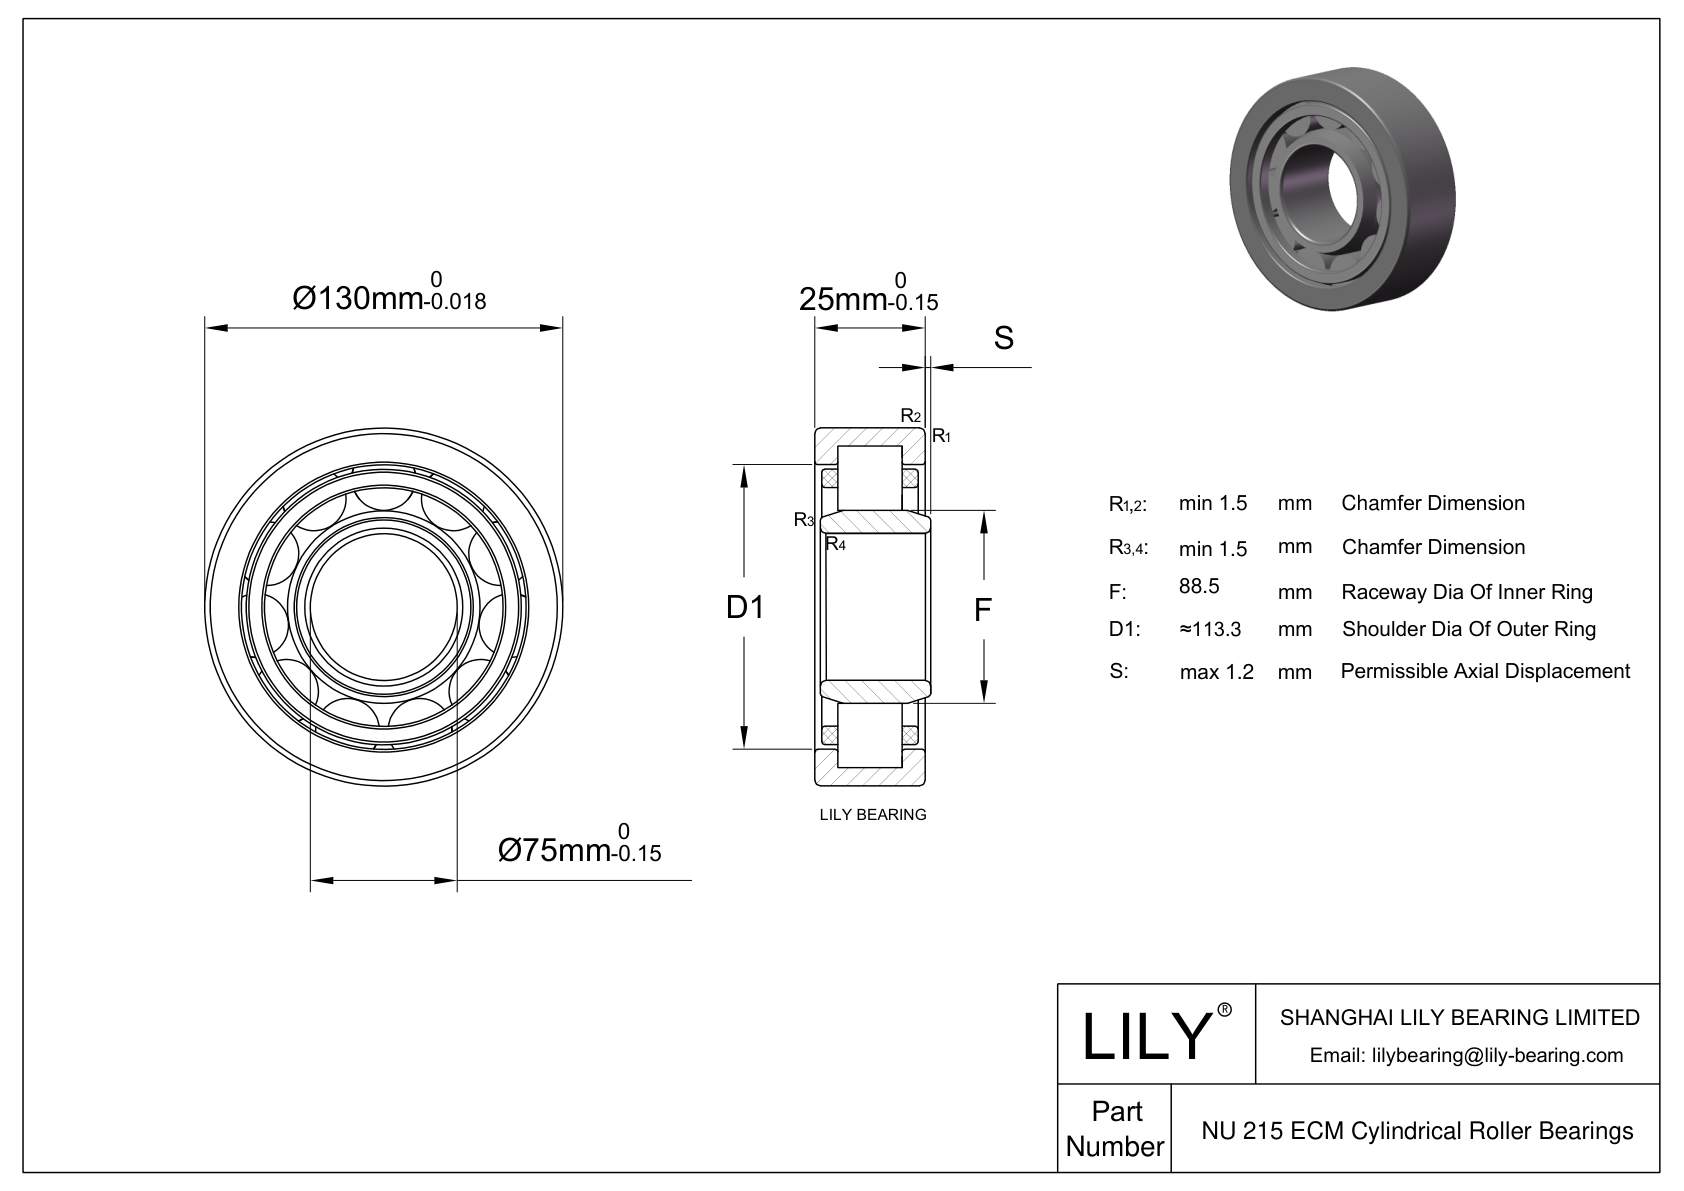 NU 215 ECM/C3VL0241 Ceramic Coated Cylindrical Roller Bearings cad drawing